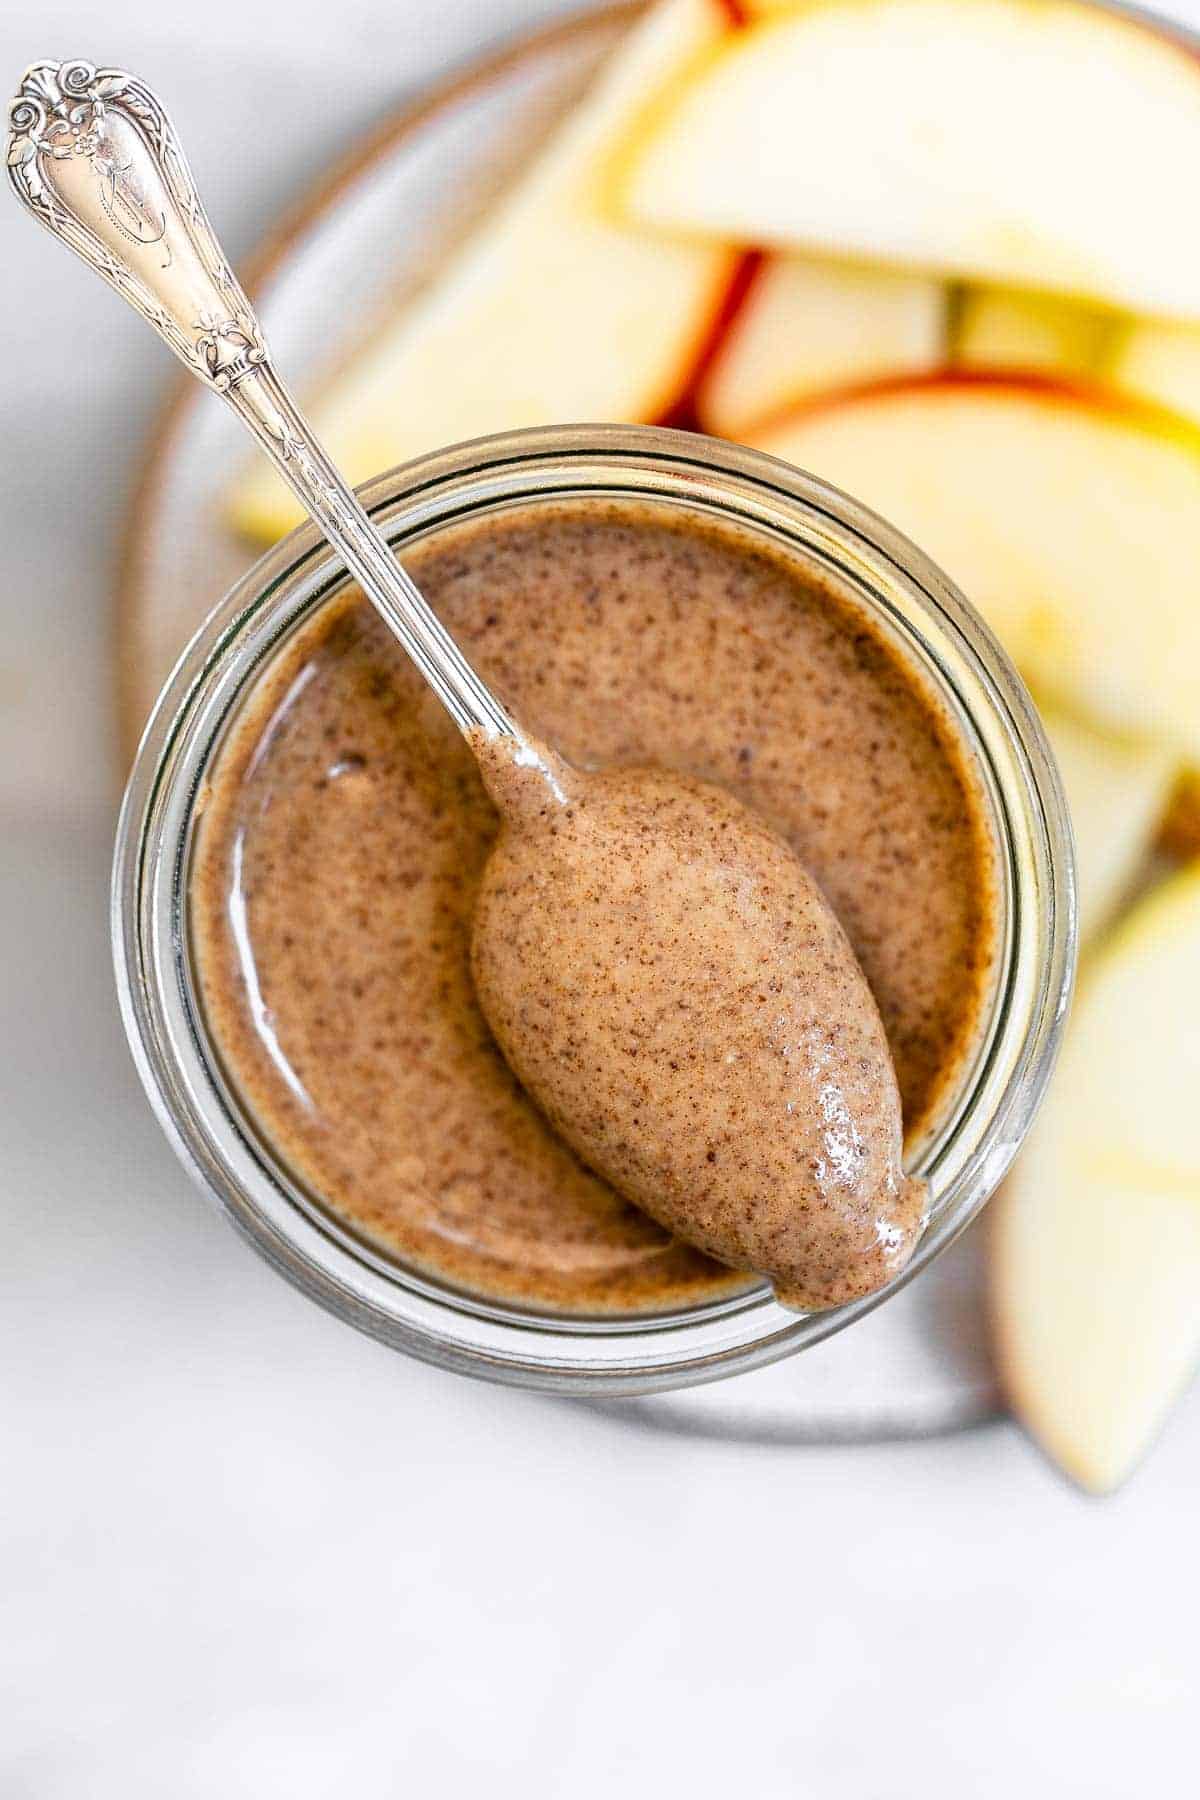 Almond butter with apple slices on the side.